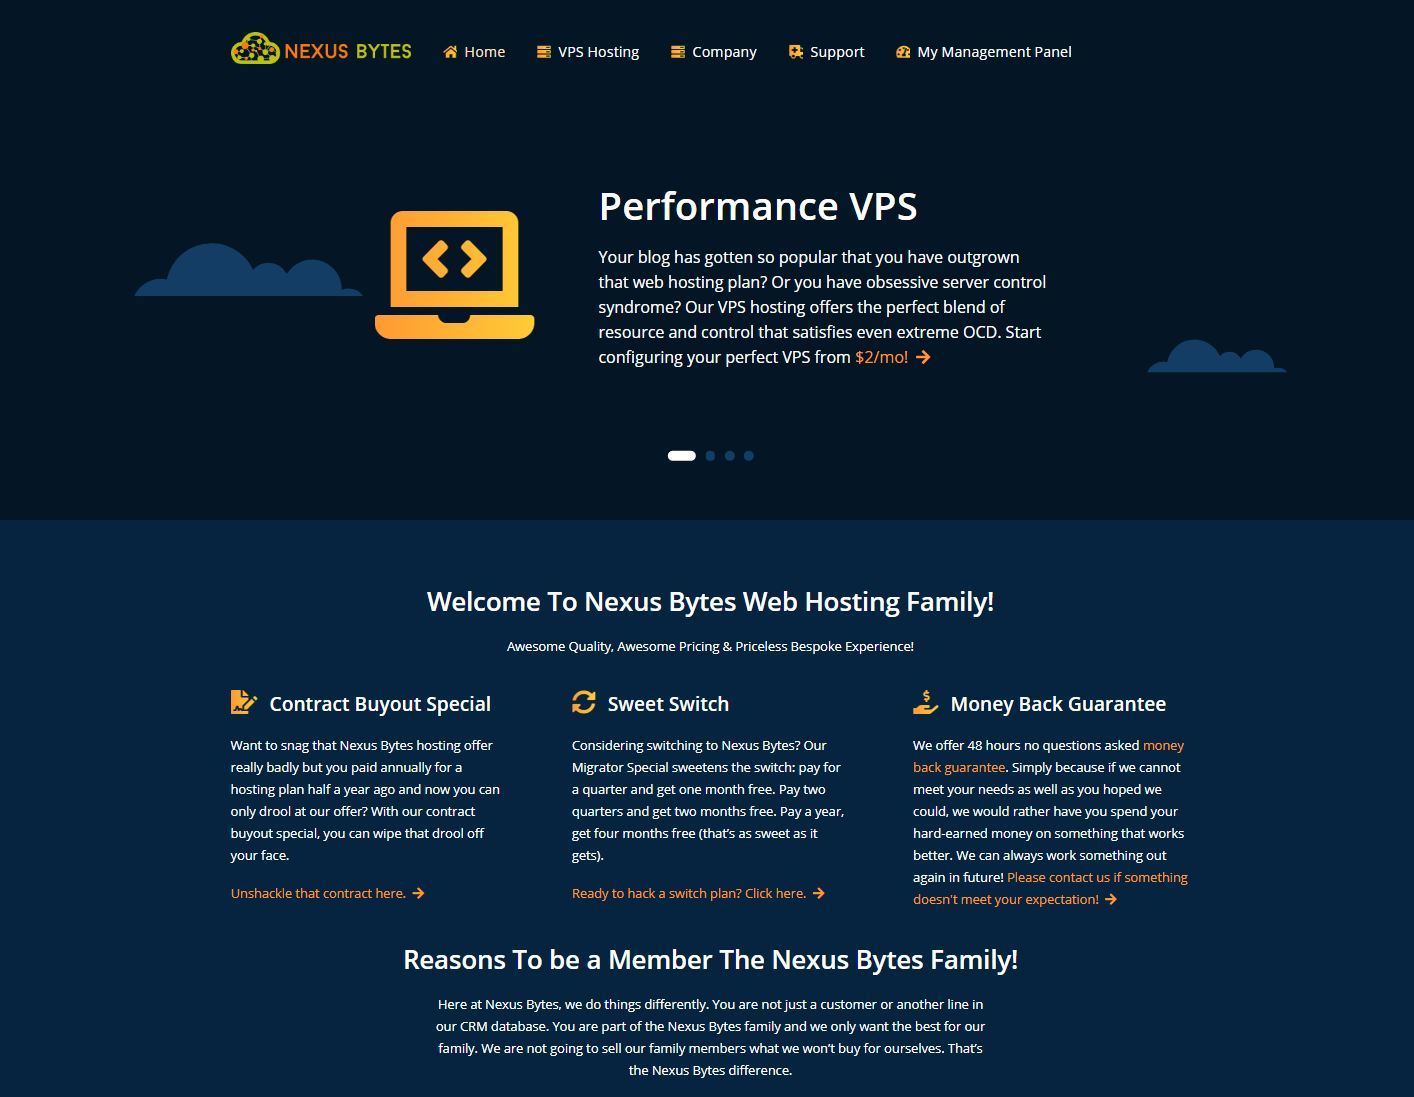 NexusBytes - Turning up the heat! - Buy 3 KVM VPS and get 1 Free! Multiple Locations